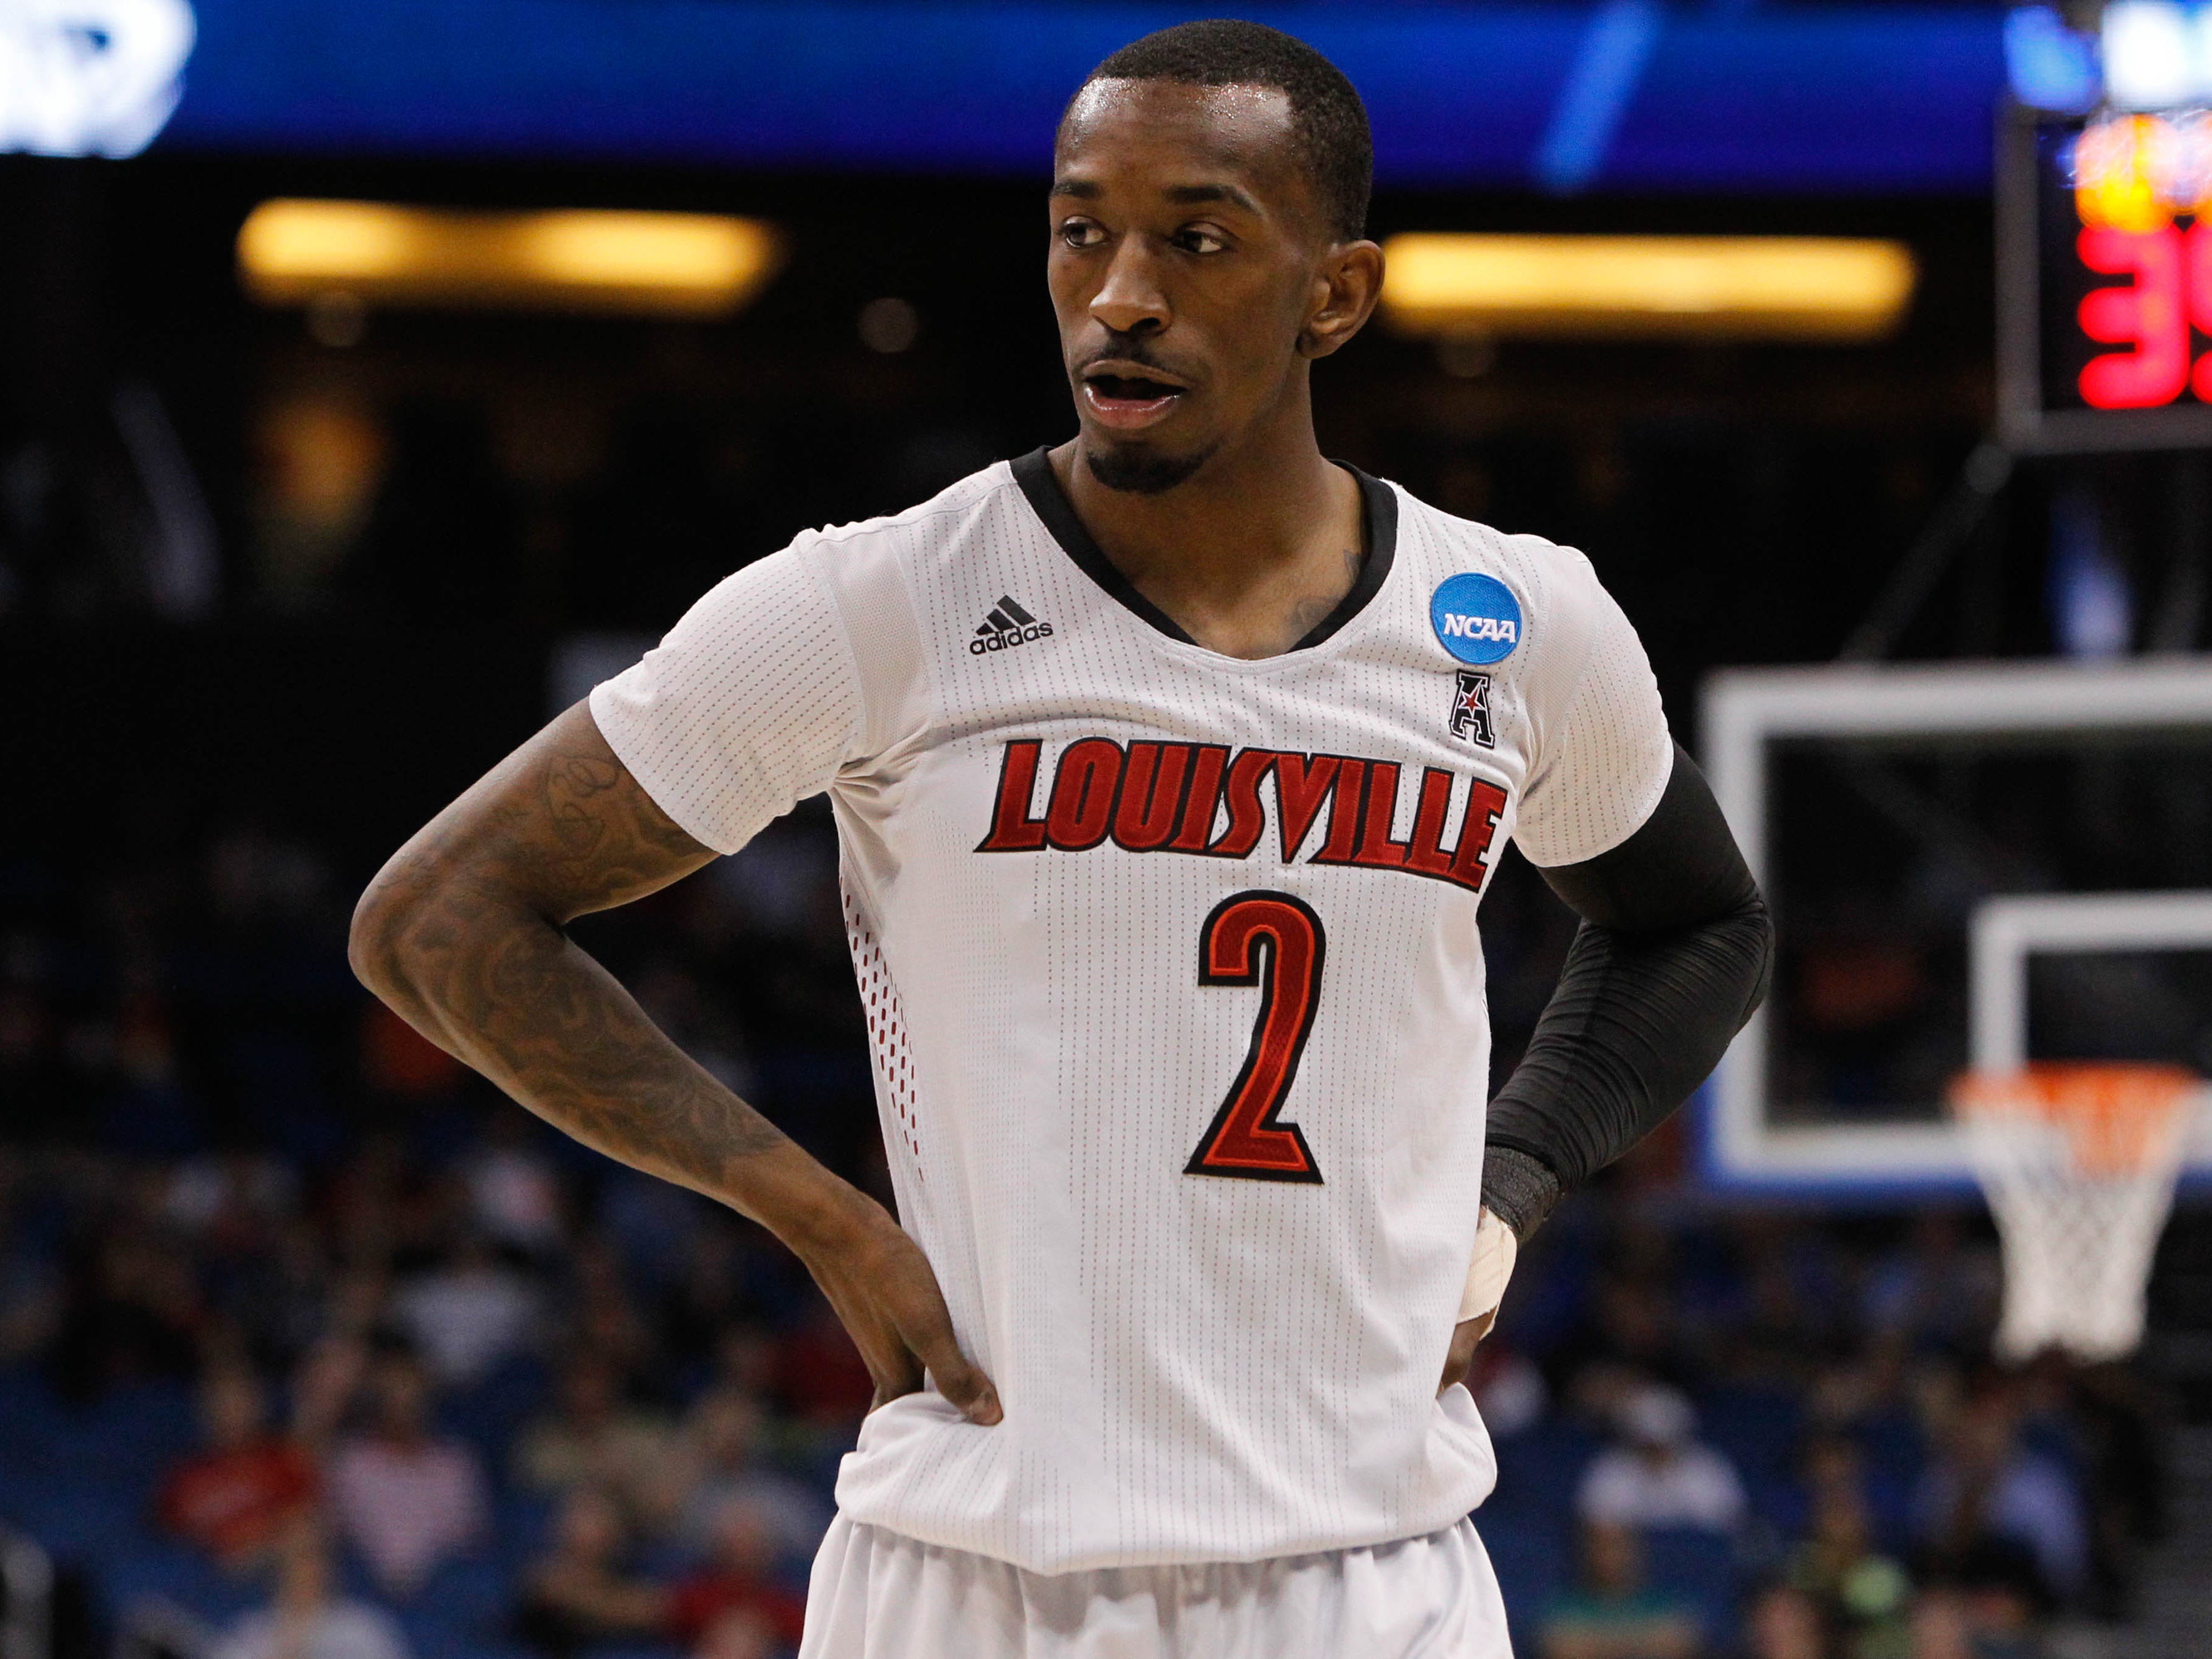 Mar 20, 2014; Orlando, FL, USA; Louisville Cardinals guard Russ Smith (2) against the Manhattan Jaspers during the second half of a men's college basketball game during the second round of the 2014 NCAA Tournament at Amway Center. Mandatory Credit: Kim Klement-USA TODAY Sports